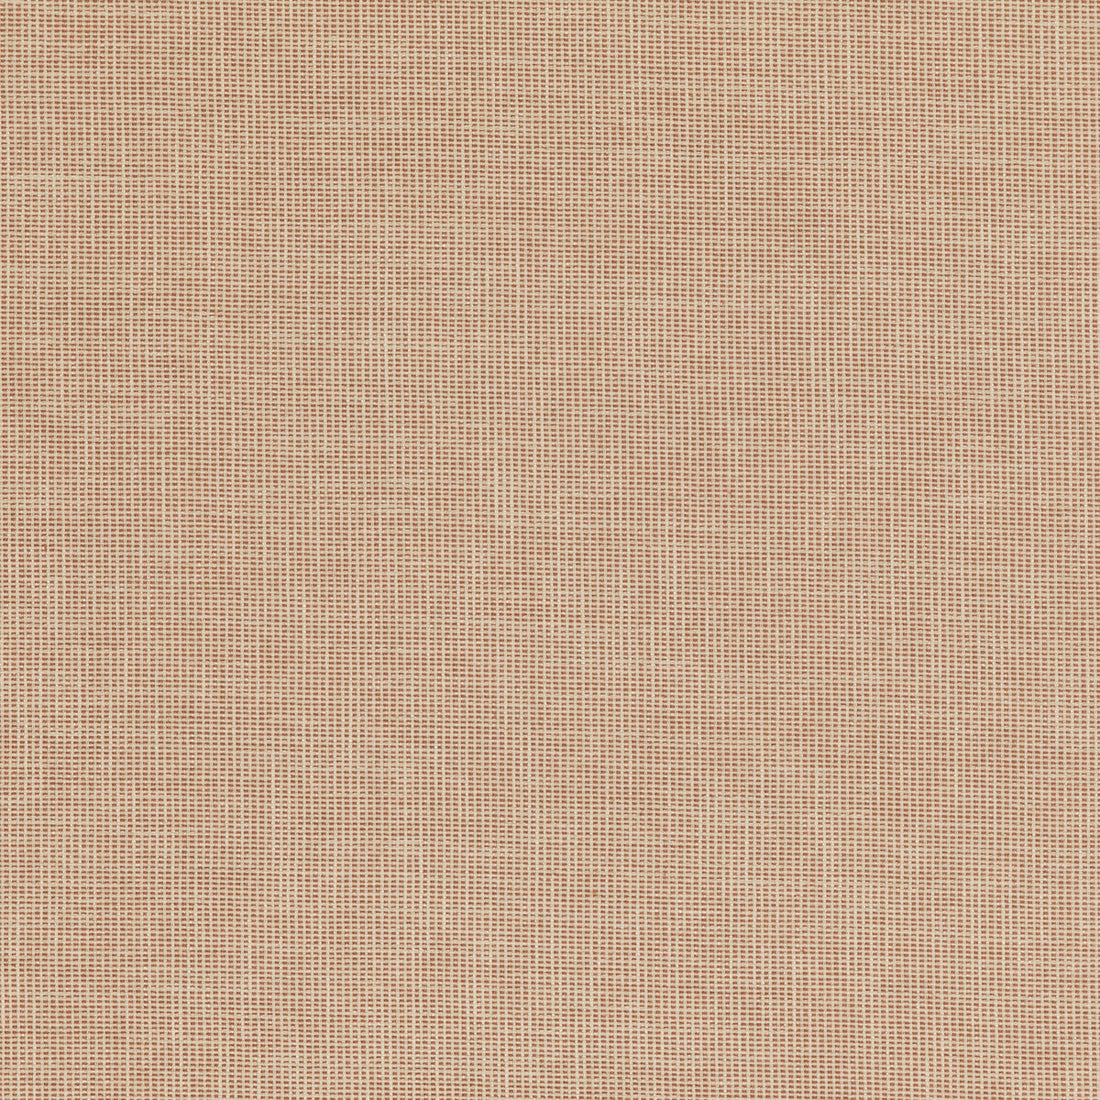 Folly fabric in spice color - pattern PF50487.330.0 - by Baker Lifestyle in the Block Weaves collection